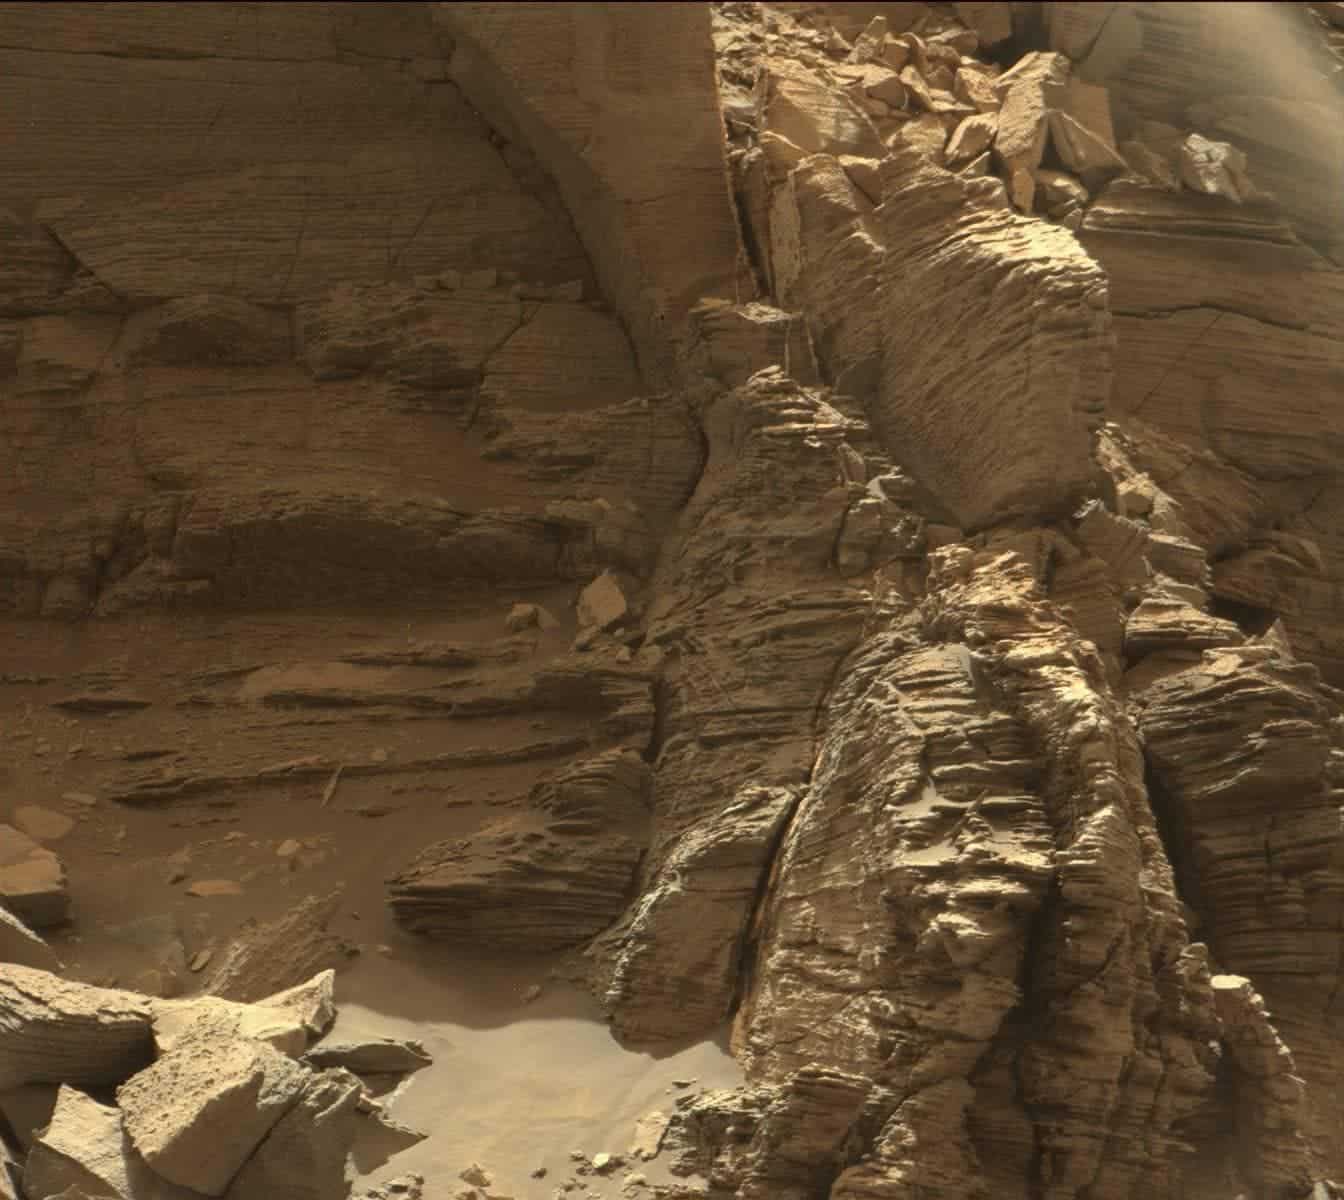 This view from the Mast Camera (Mastcam) in NASA's Curiosity Mars rover shows an outcrop with finely layered rocks within the 